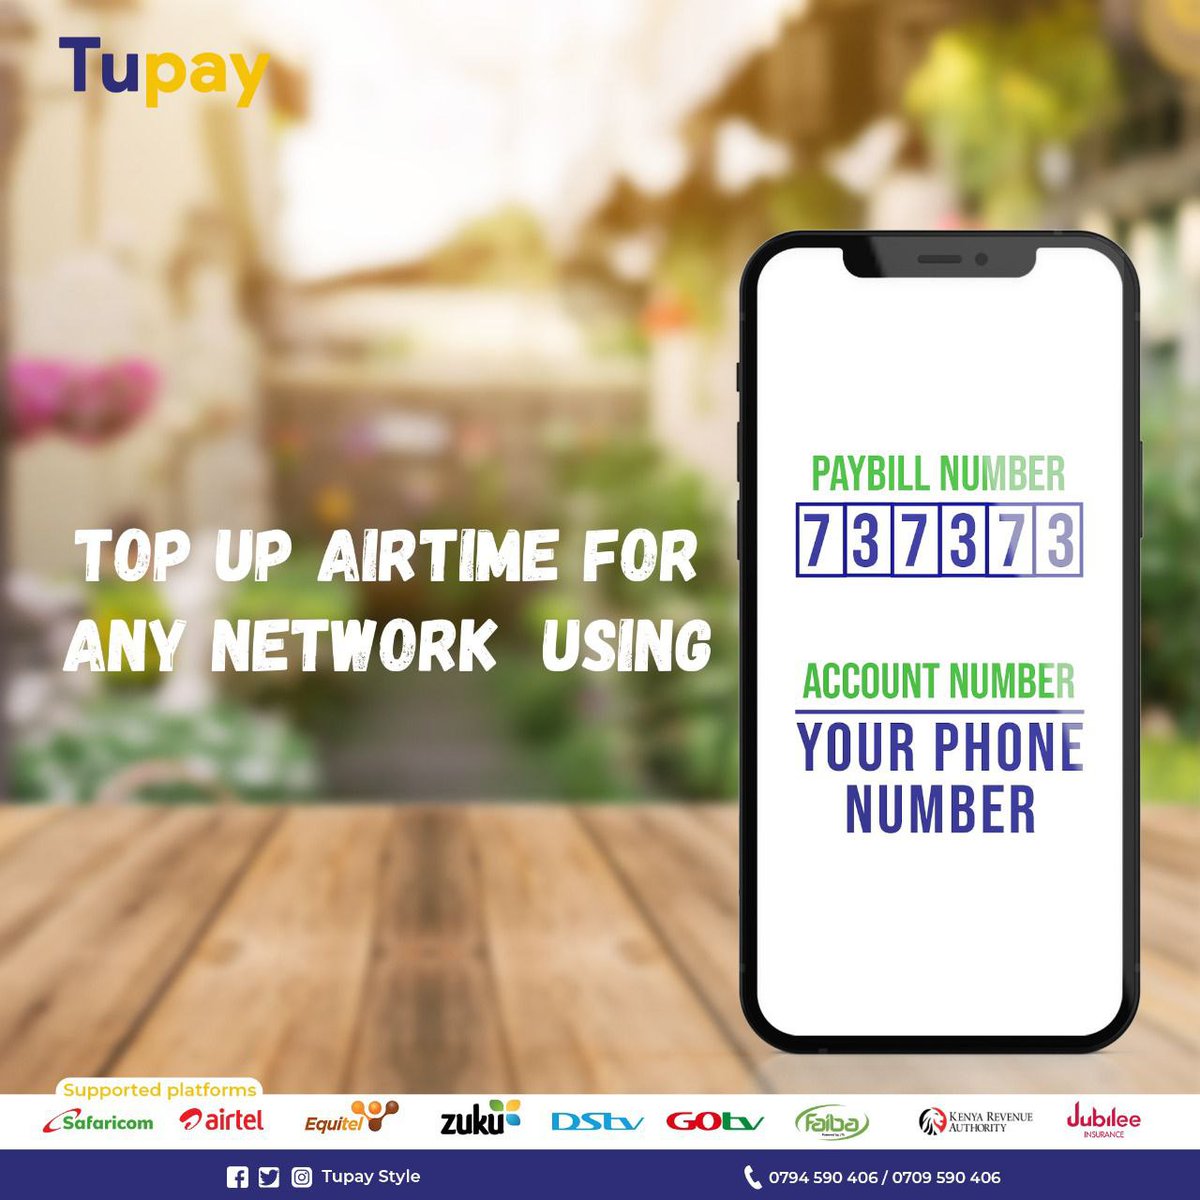 This November, Tubonge na Family and Friends Easy & Conveniently !
Buy Airtime to any Network using Paybill 737373 na inakam chap-chap.

#TillniTill #Tripo73 #November2022